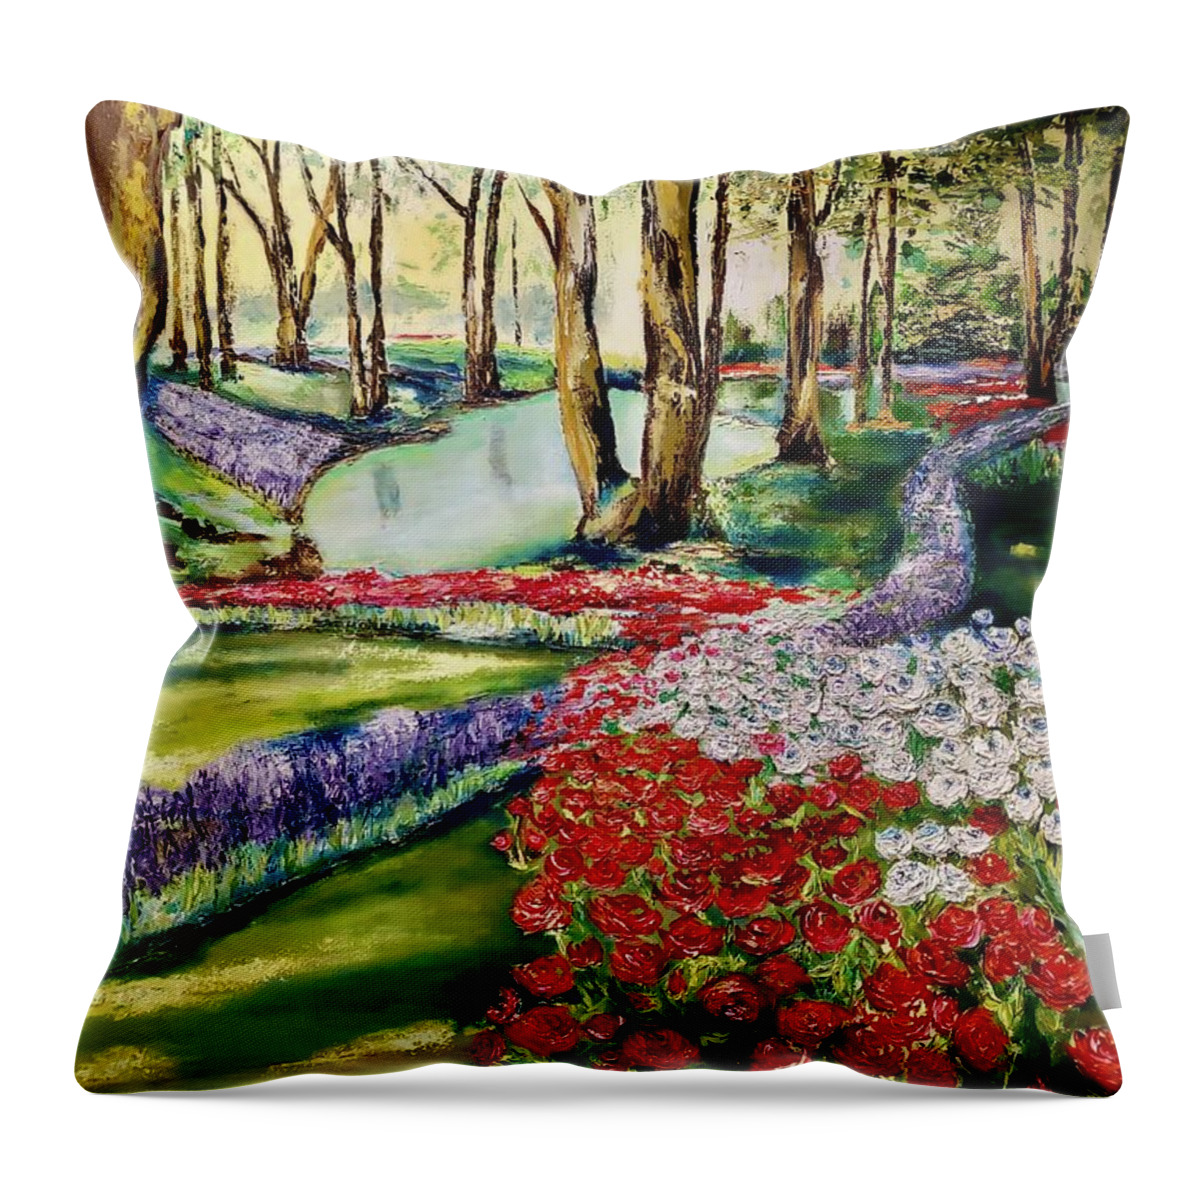 Flower Garden Throw Pillow featuring the painting Tranquility by Sunel De Lange